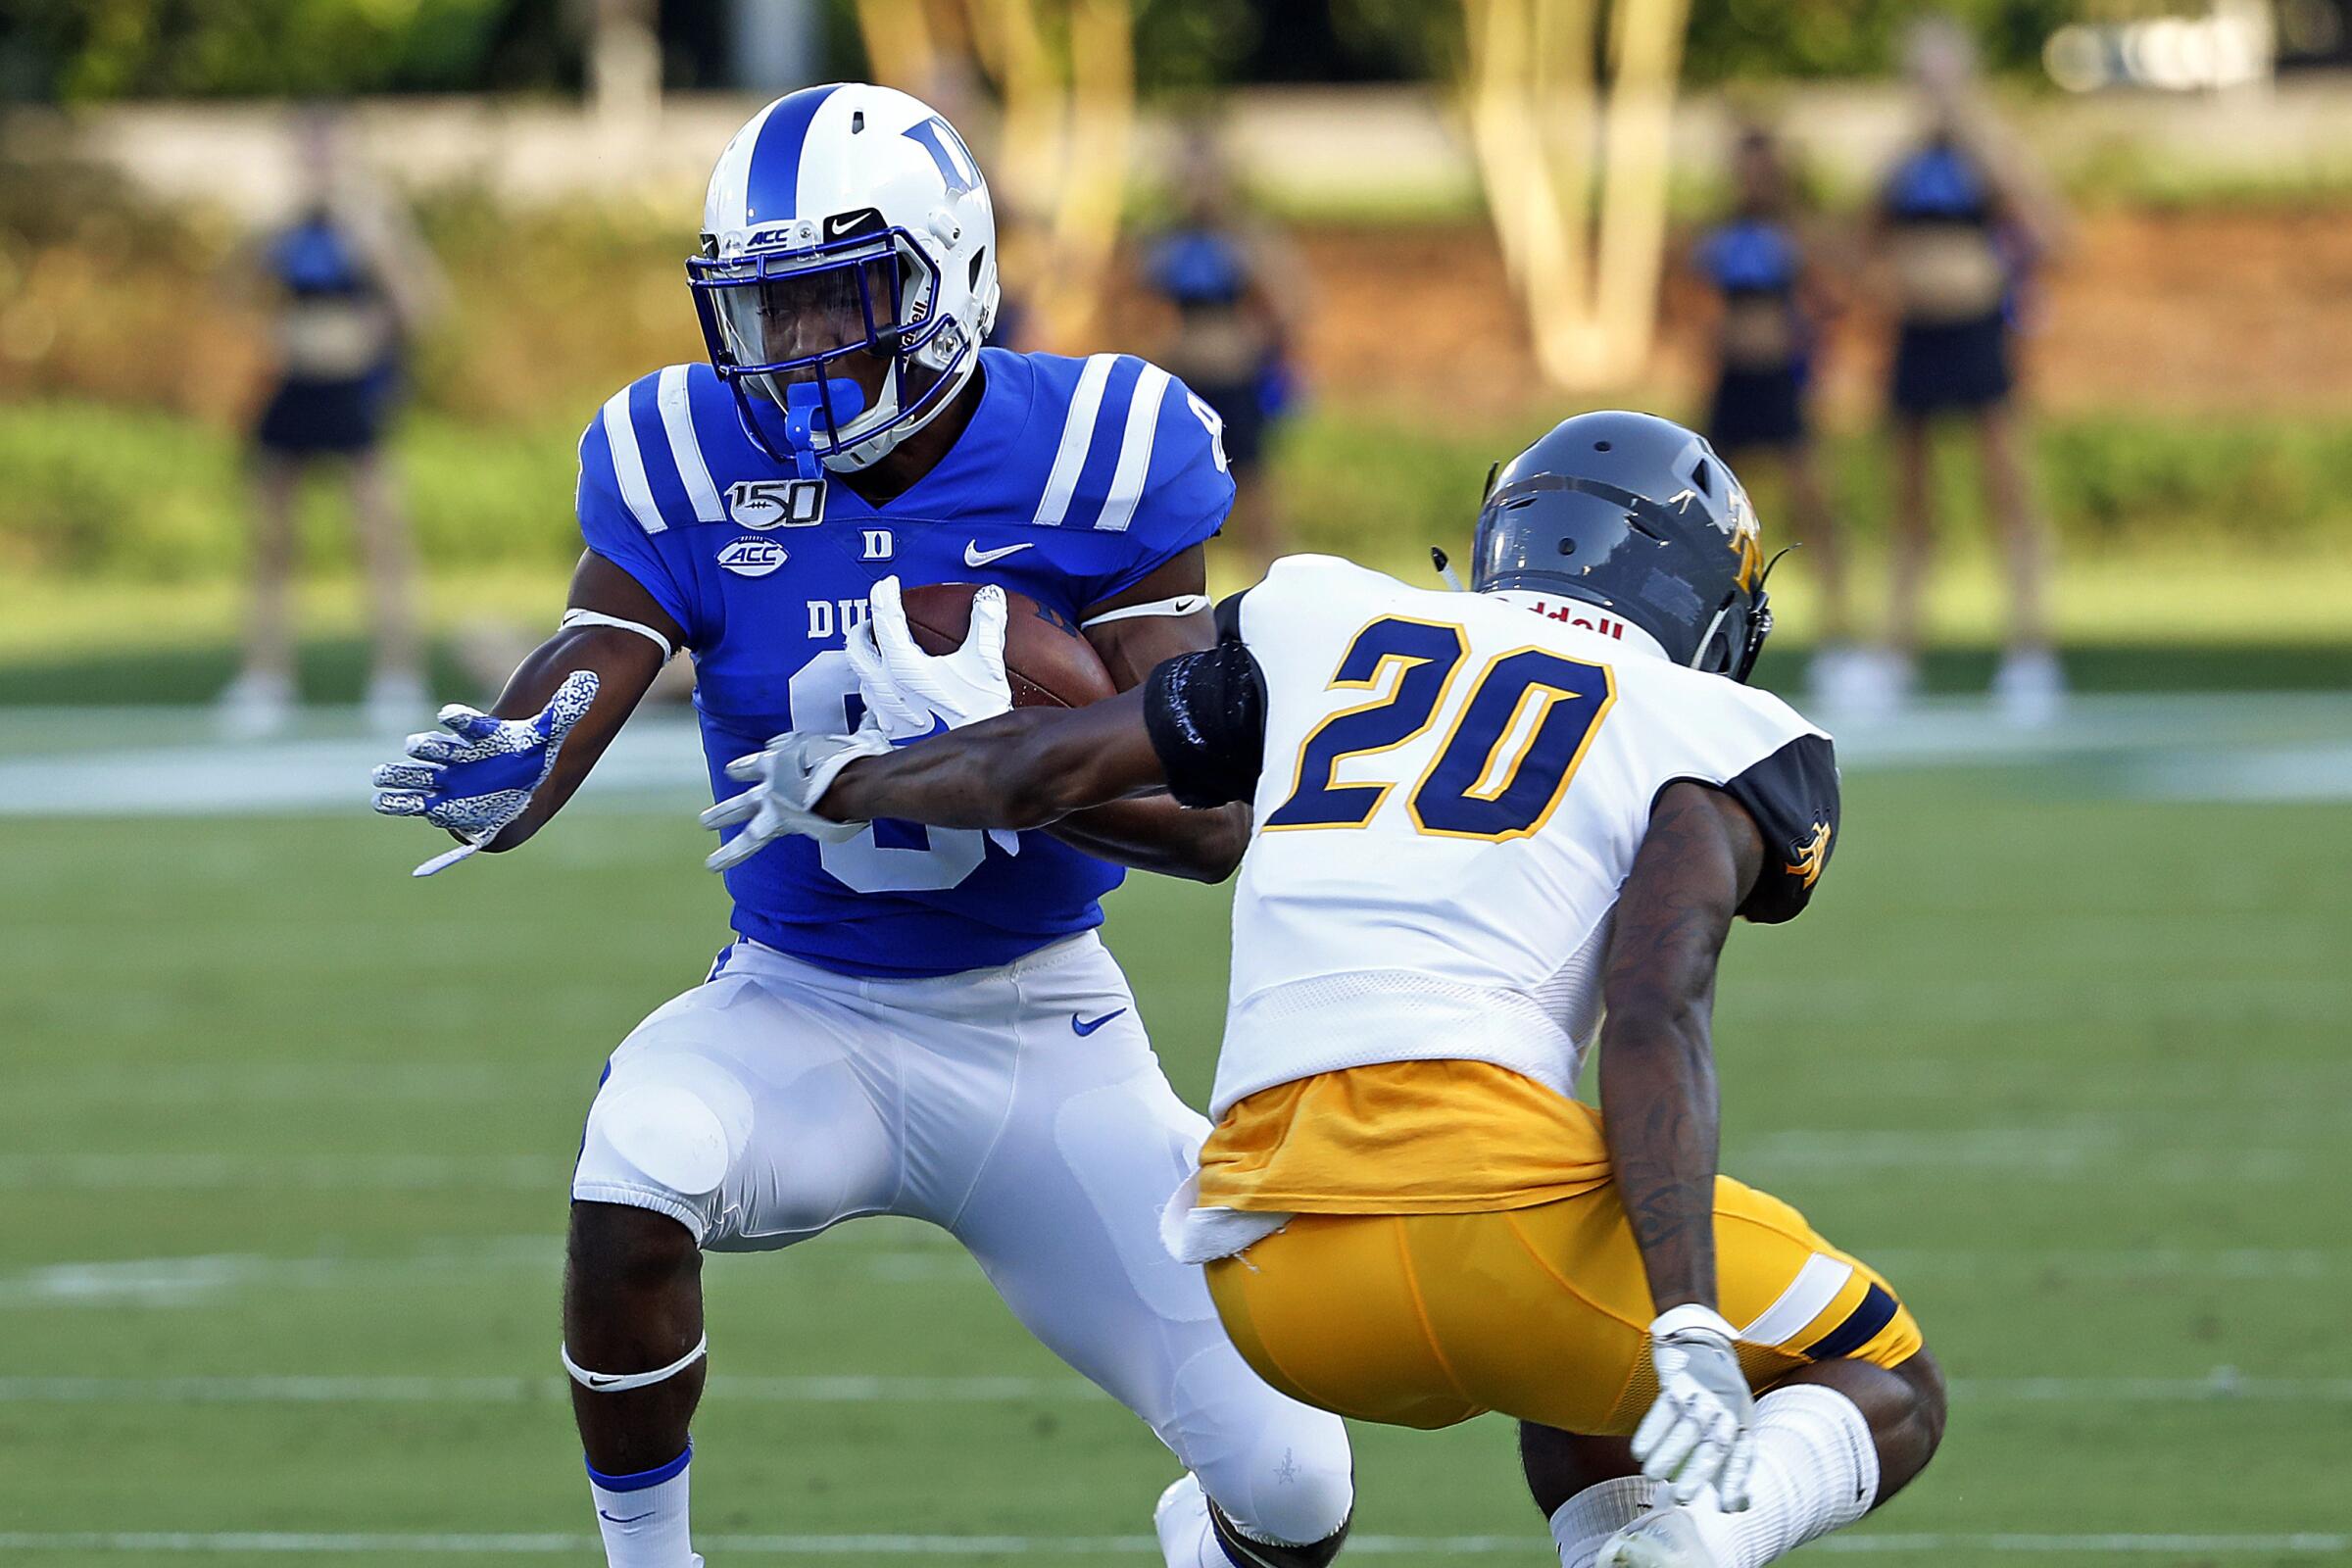 Duke's Brittain Brown (8) pulls away from North Carolina A&T's Najee Reams (20) .